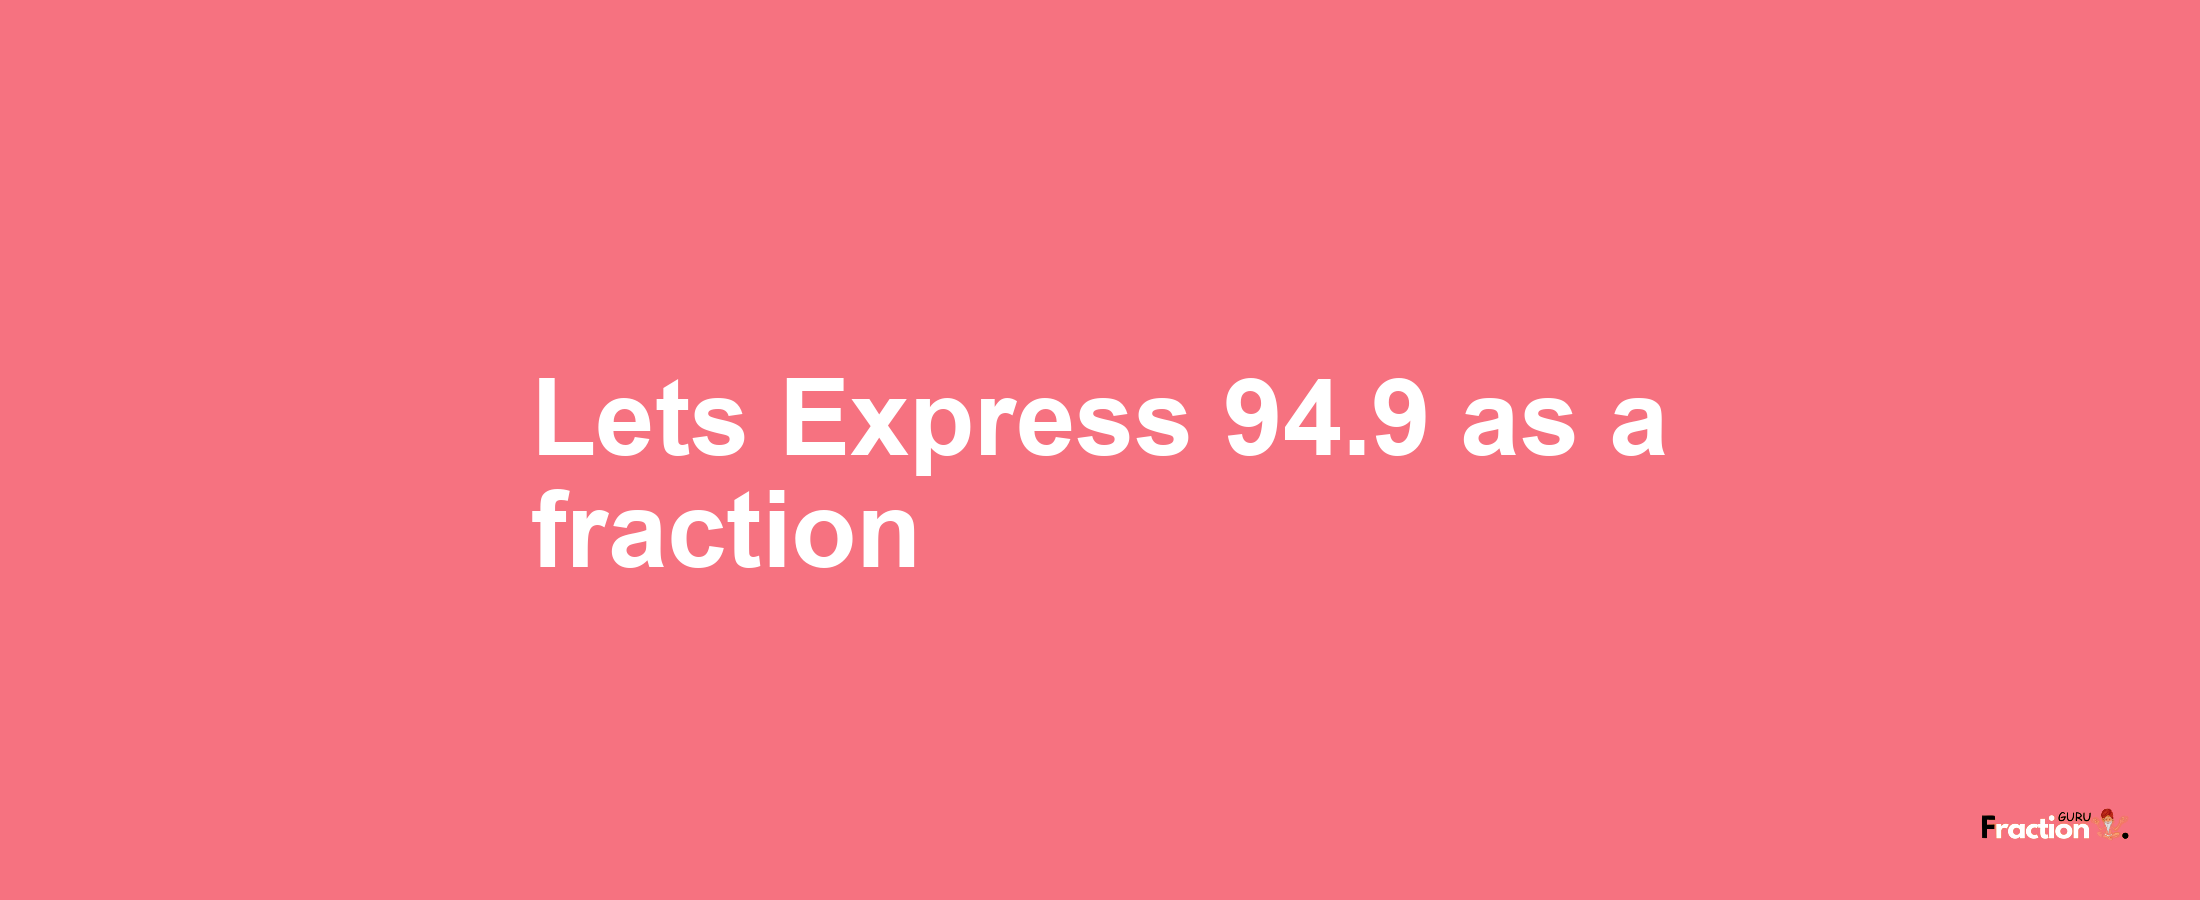 Lets Express 94.9 as afraction